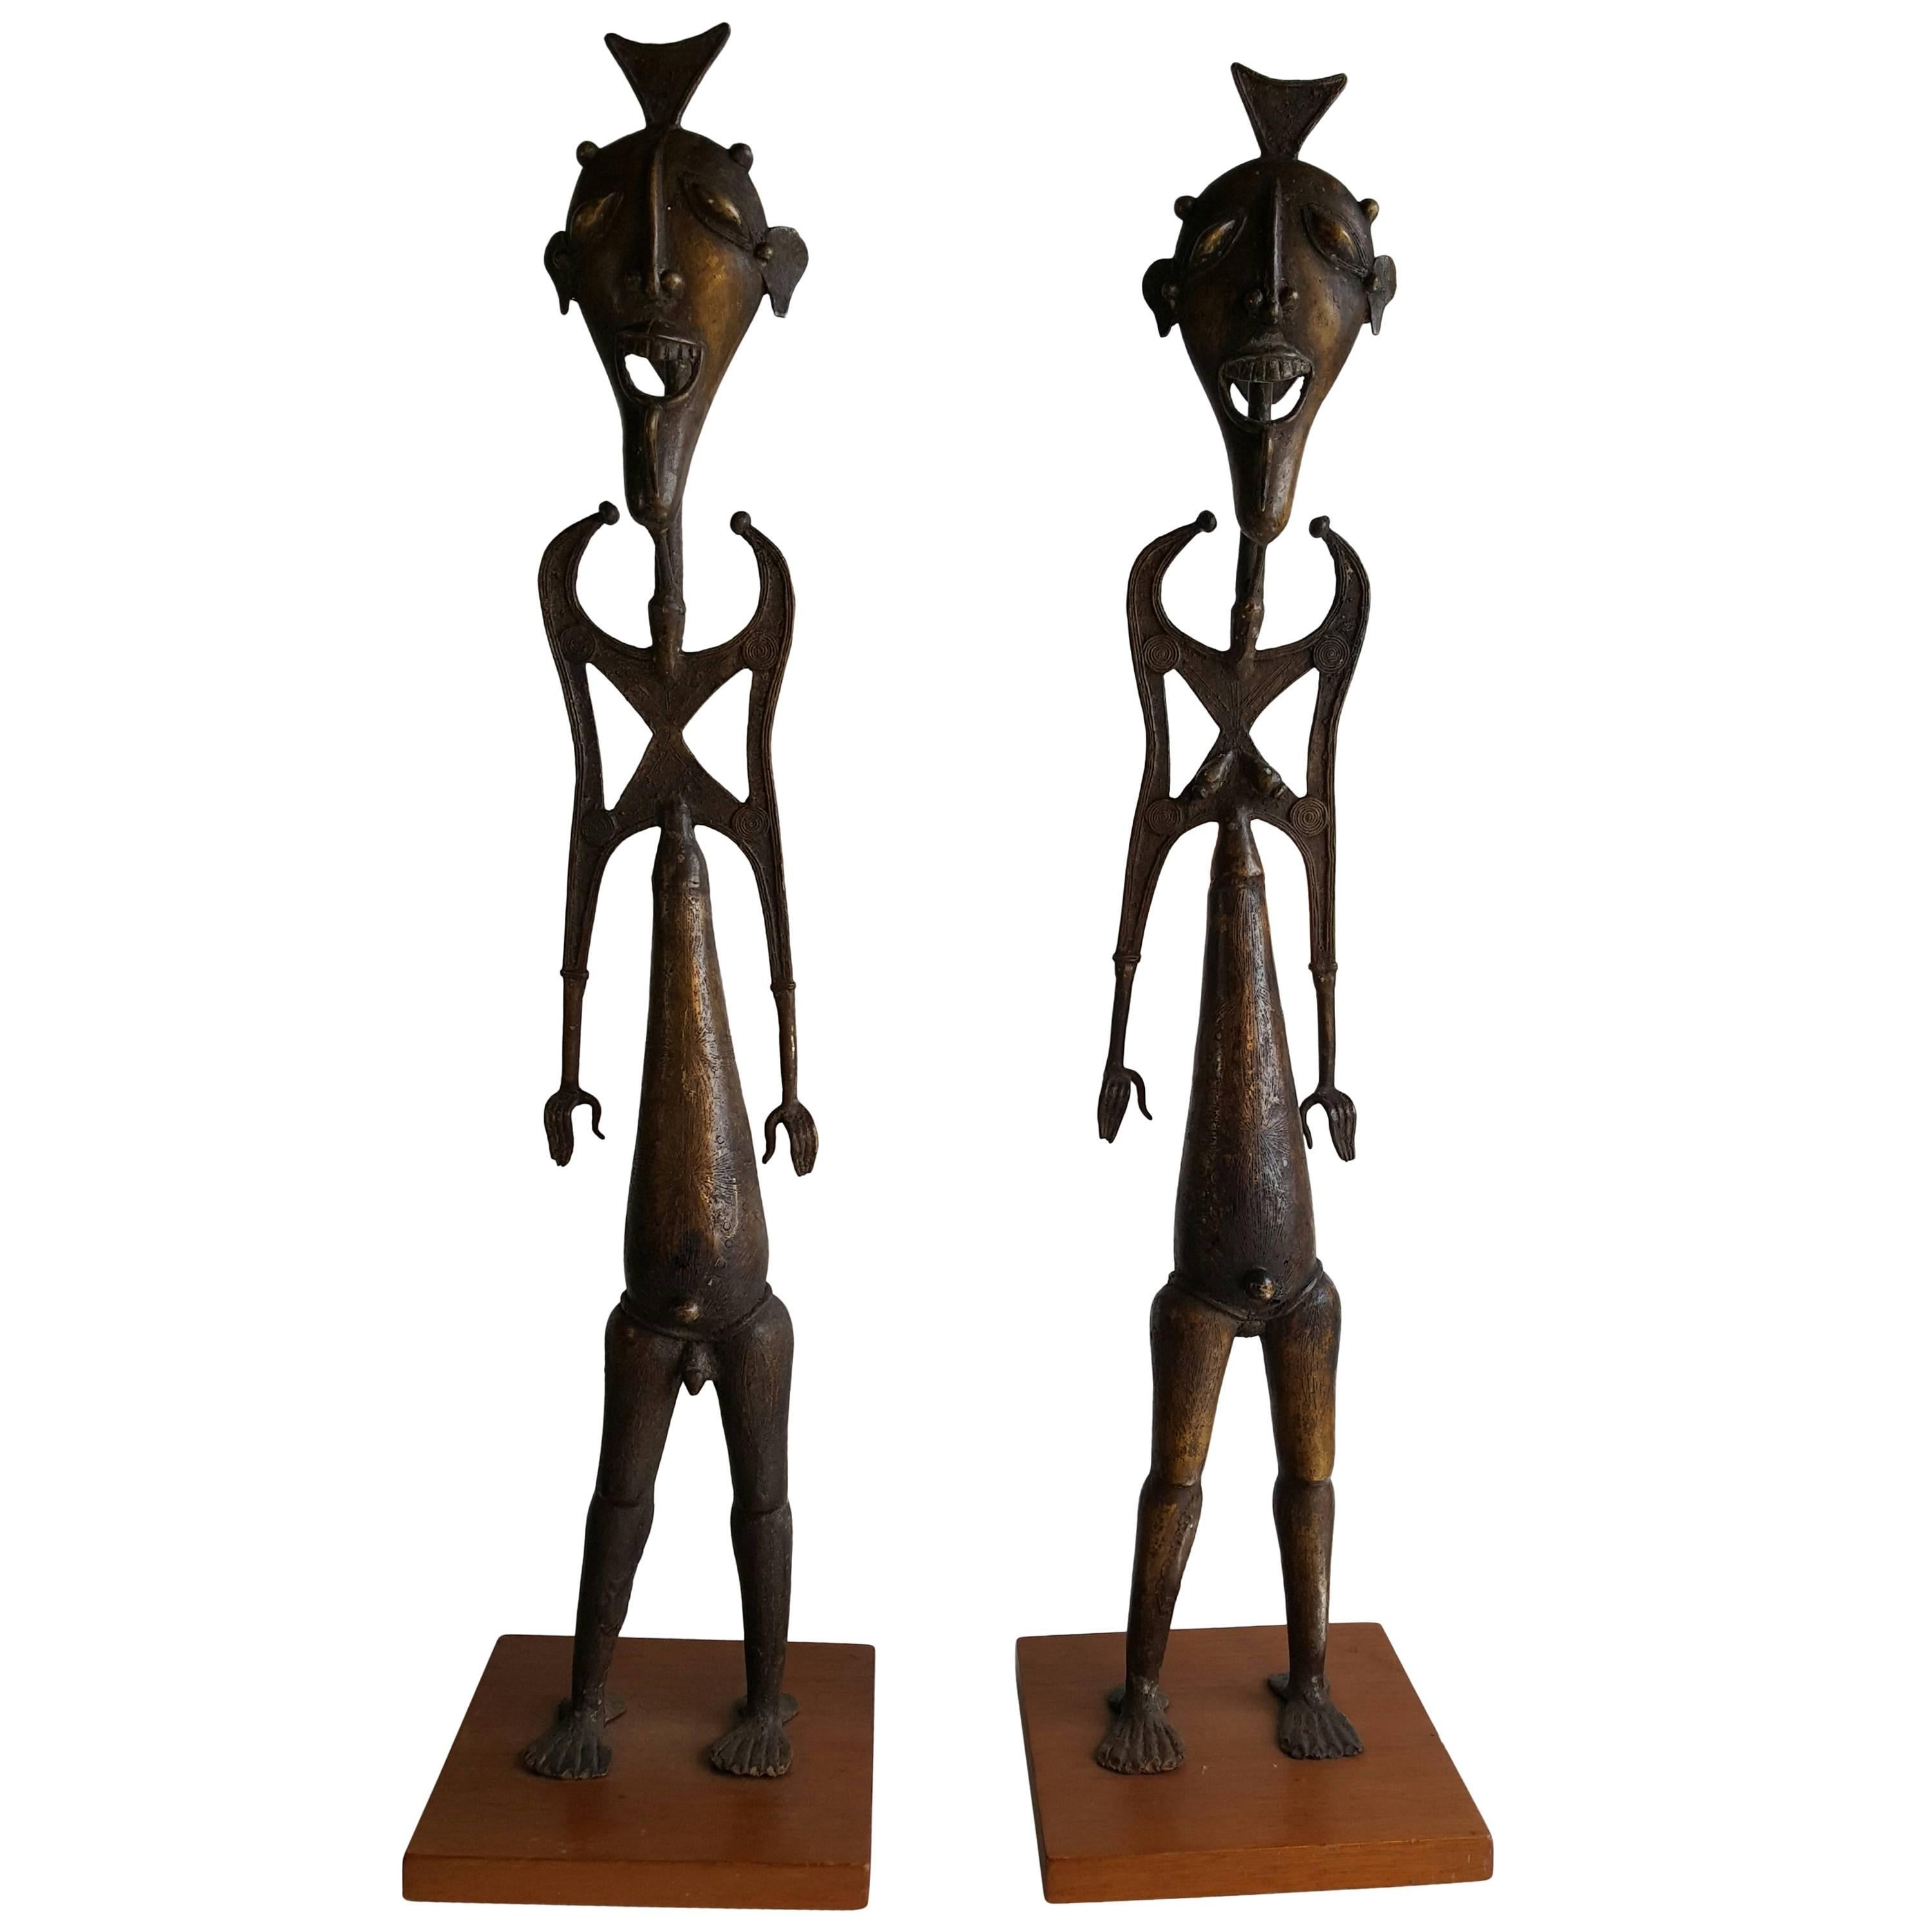 Modernist Bronze African Statues of Whimsical Man and Women